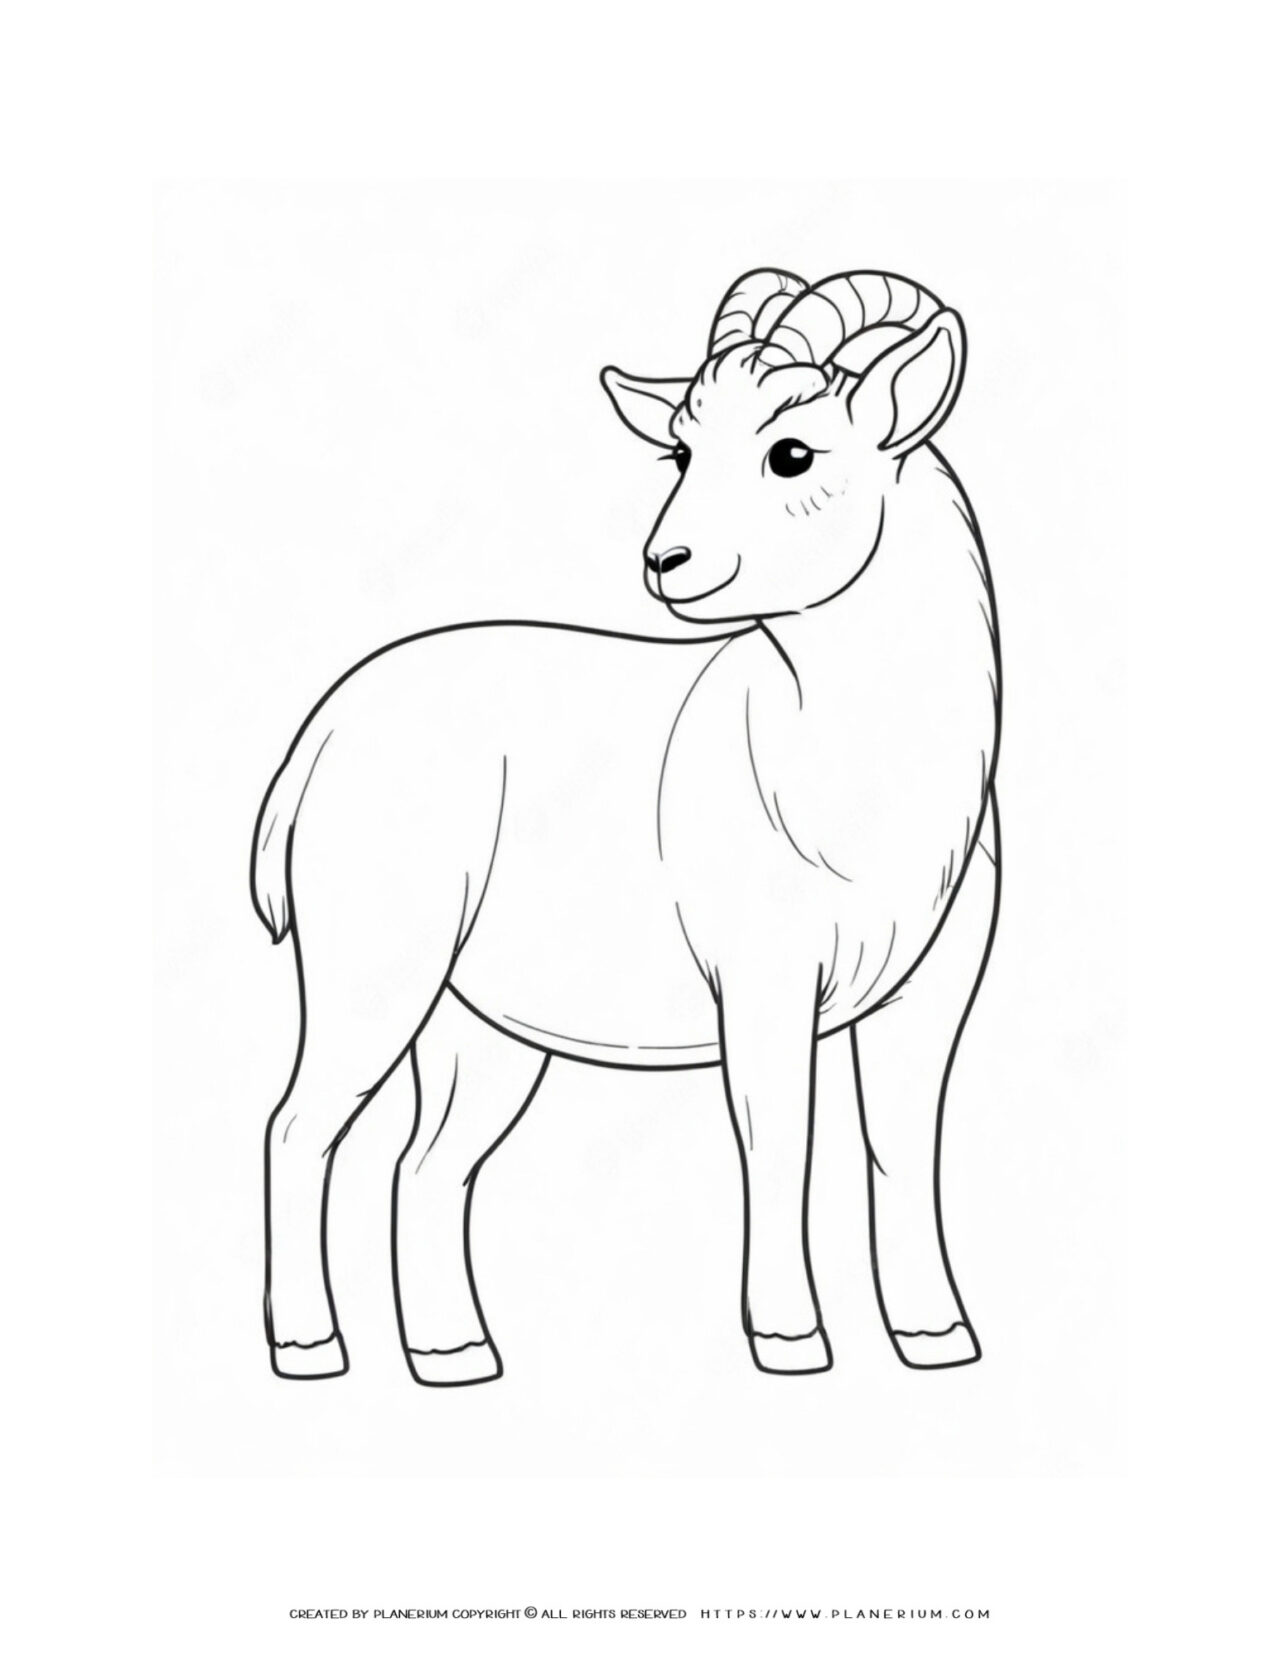 Goat-Outline-Simple-Coloring-Page